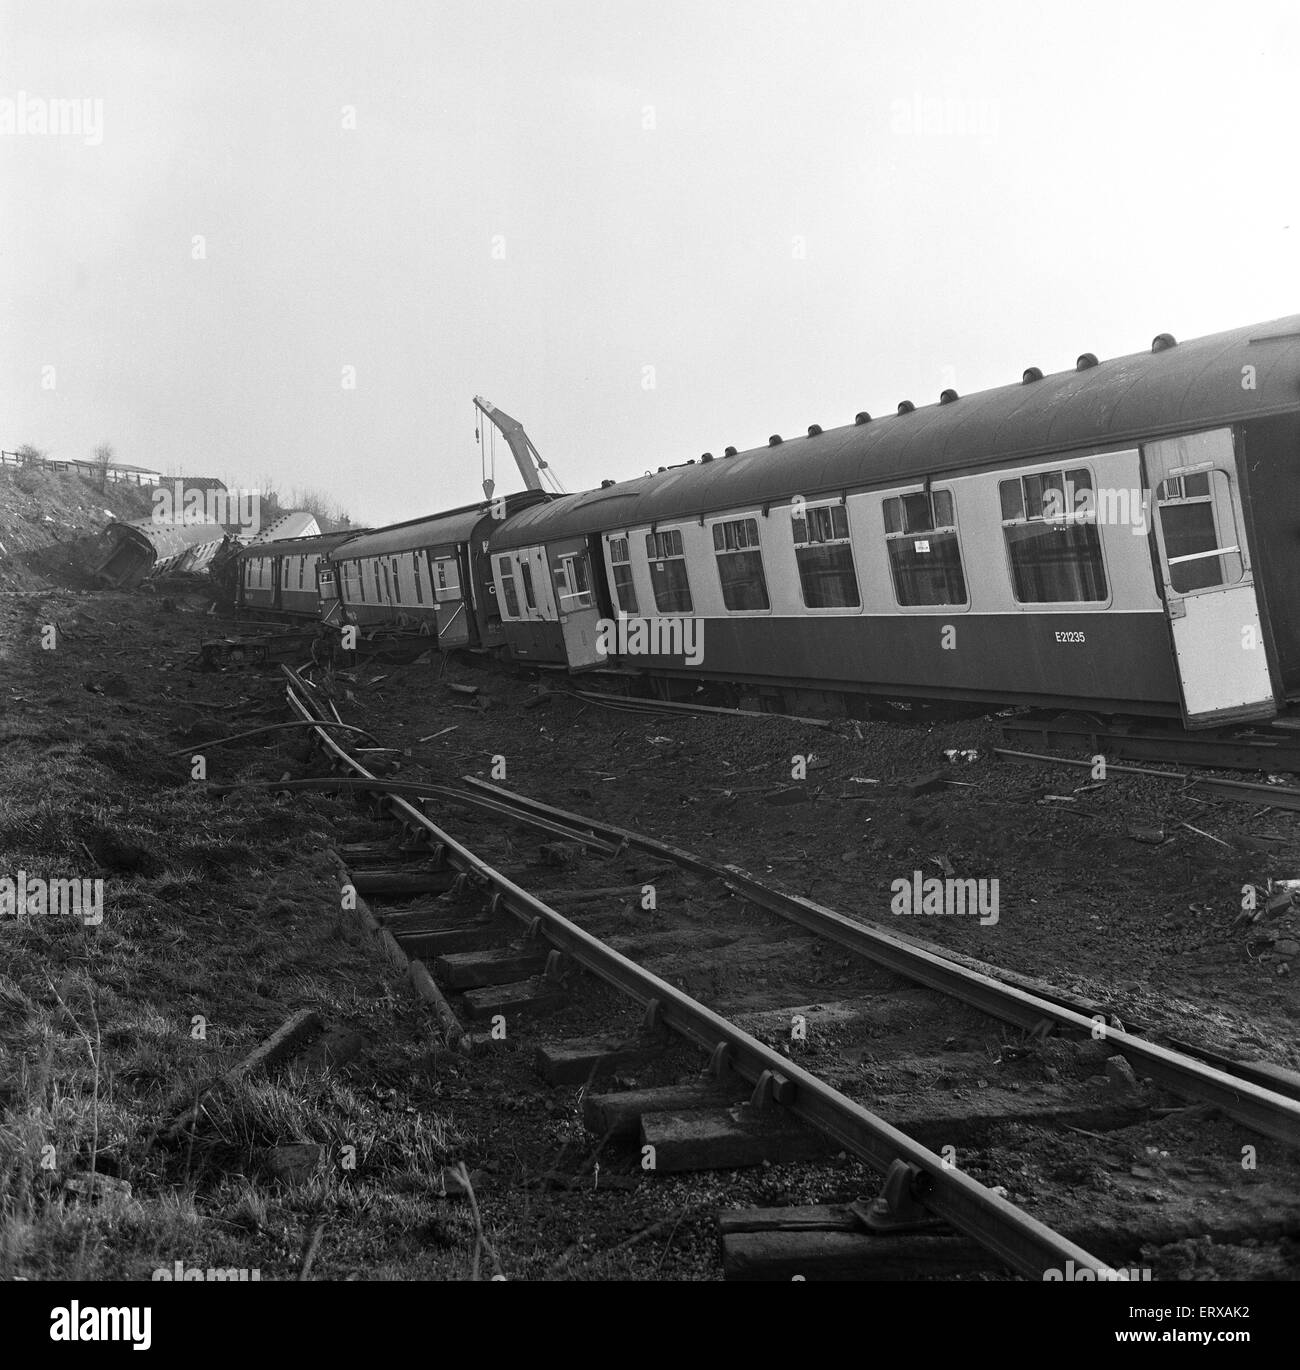 Morpeth Rail Crash On 7 May 1969 a northbound sleeper express train from London to Aberdeen derailed on the Morpeth curve. Six people were killed, 21 were injured and the roof of the station's northbound platform was damaged. Stock Photo